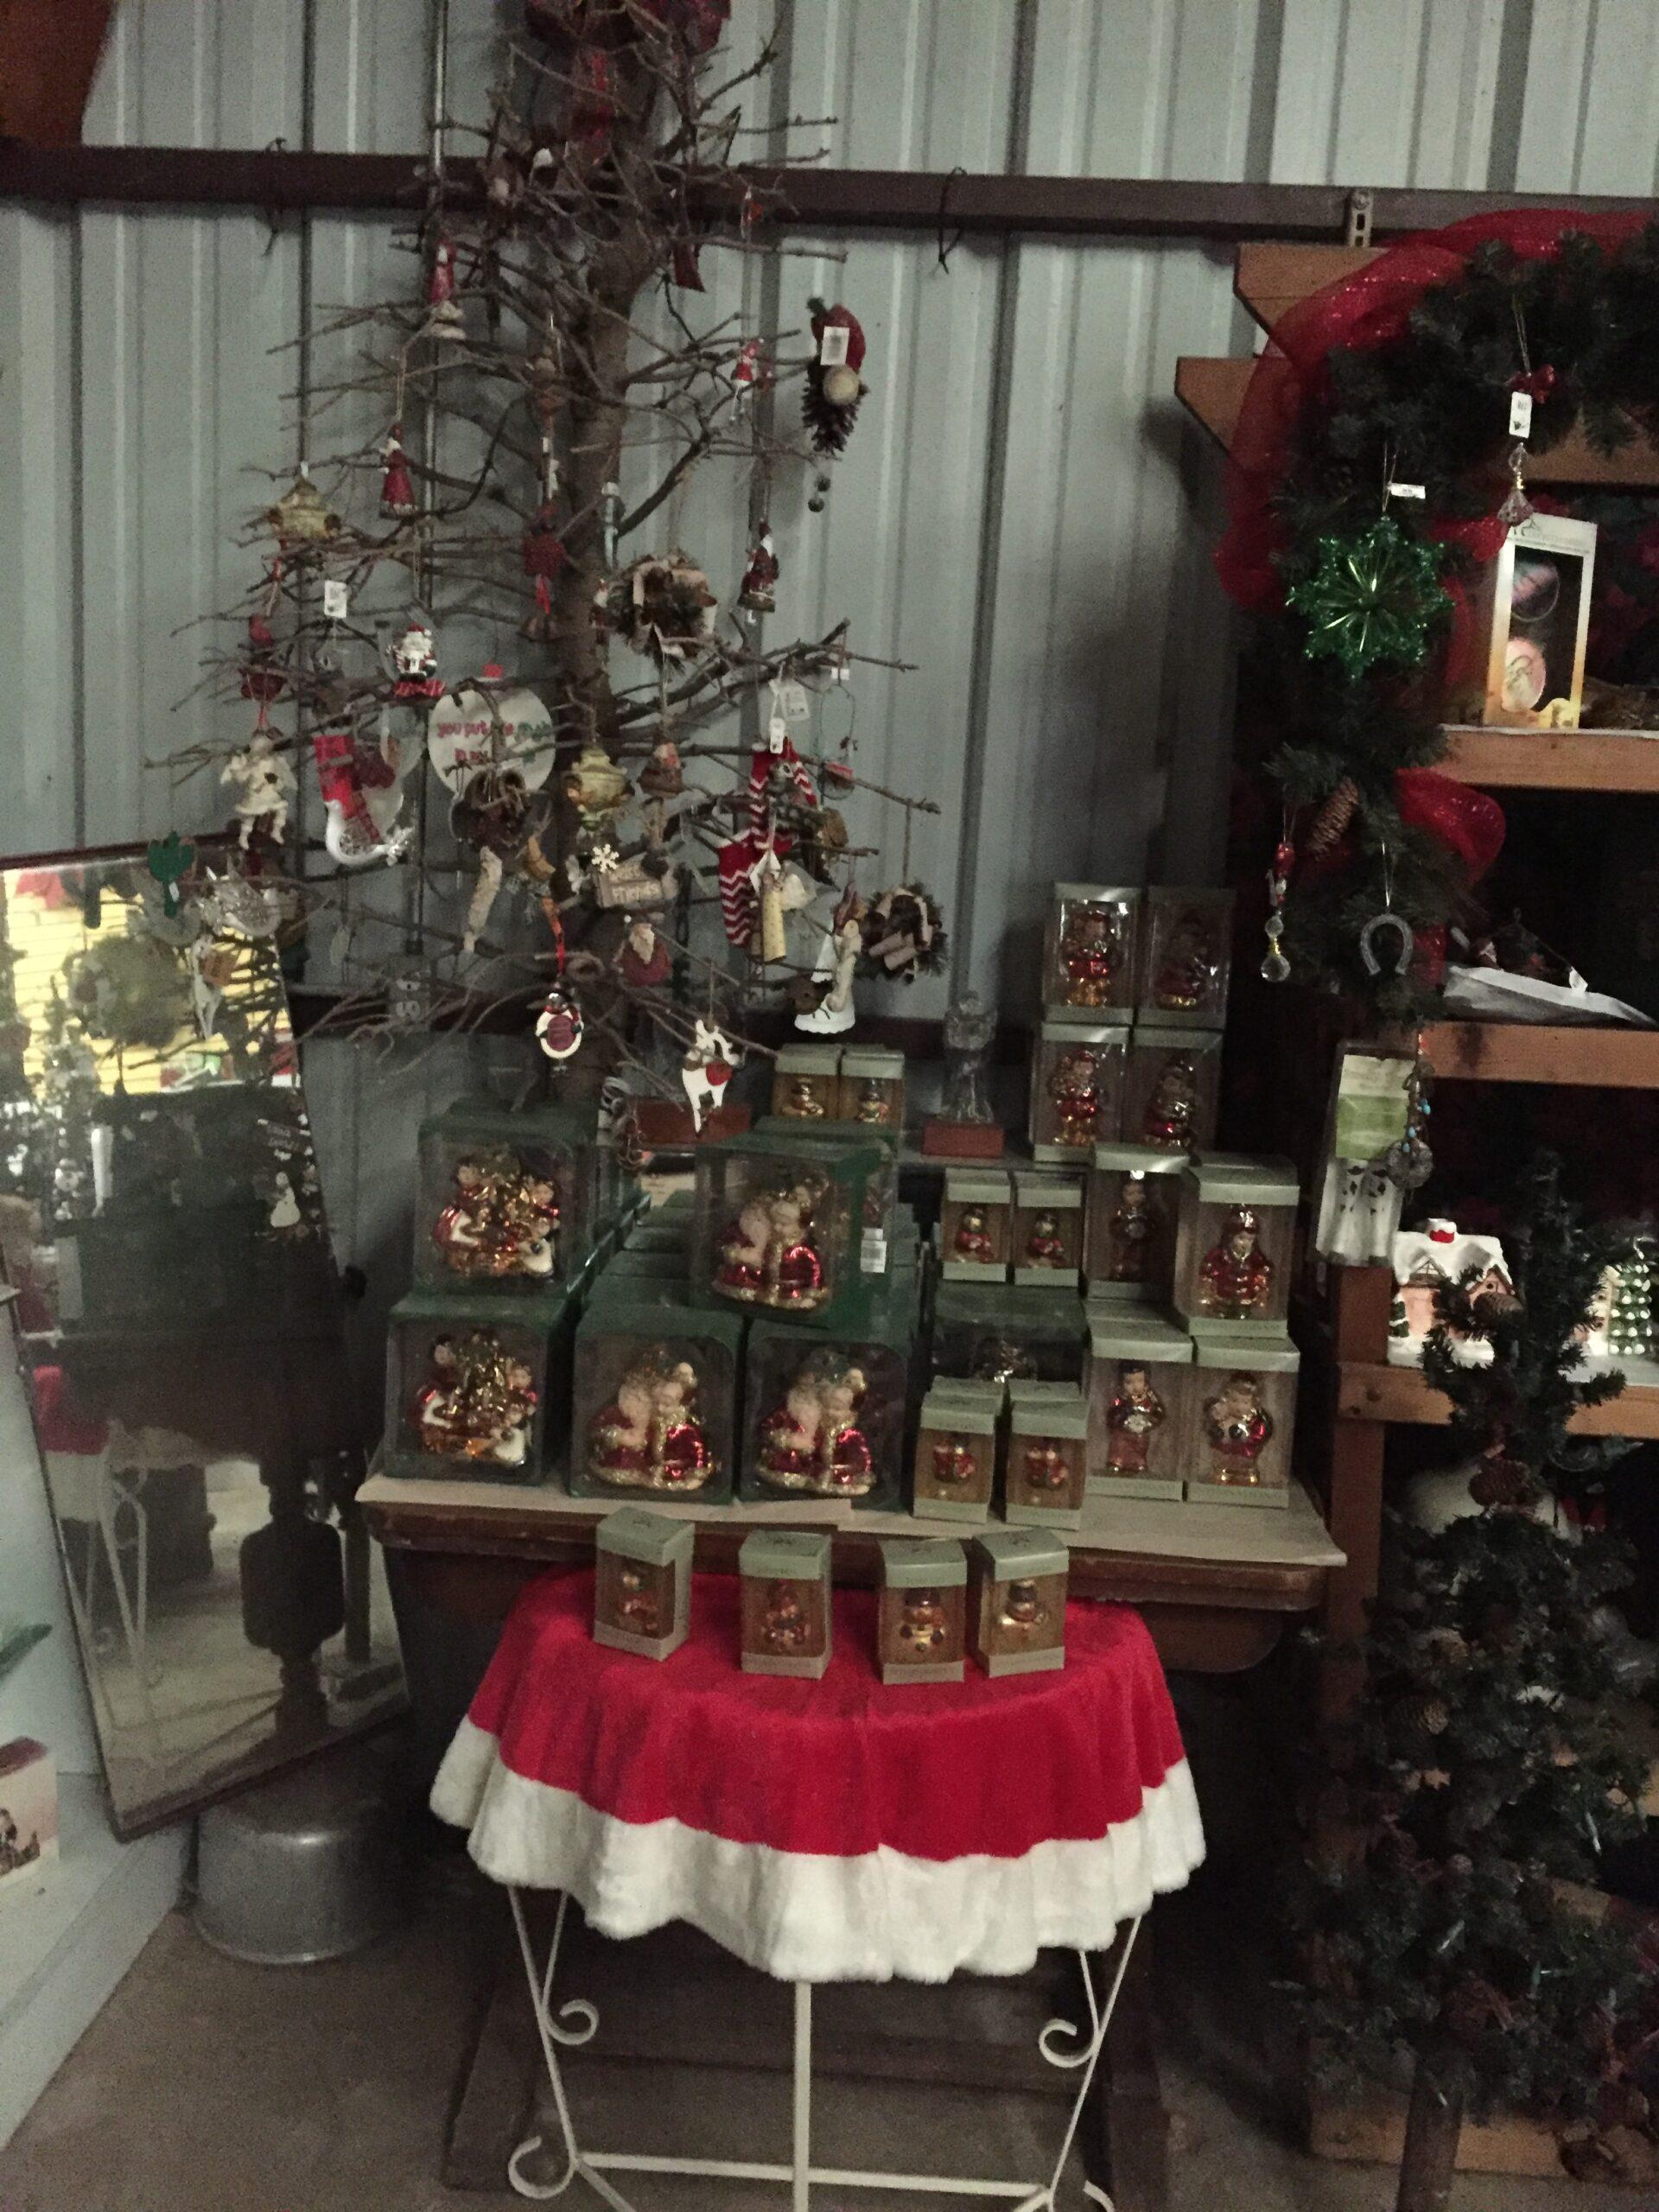 Row of available ornaments, bells, and other Christmas decorations on shelving at Haynie's Green Acres Christmas Tree farm.